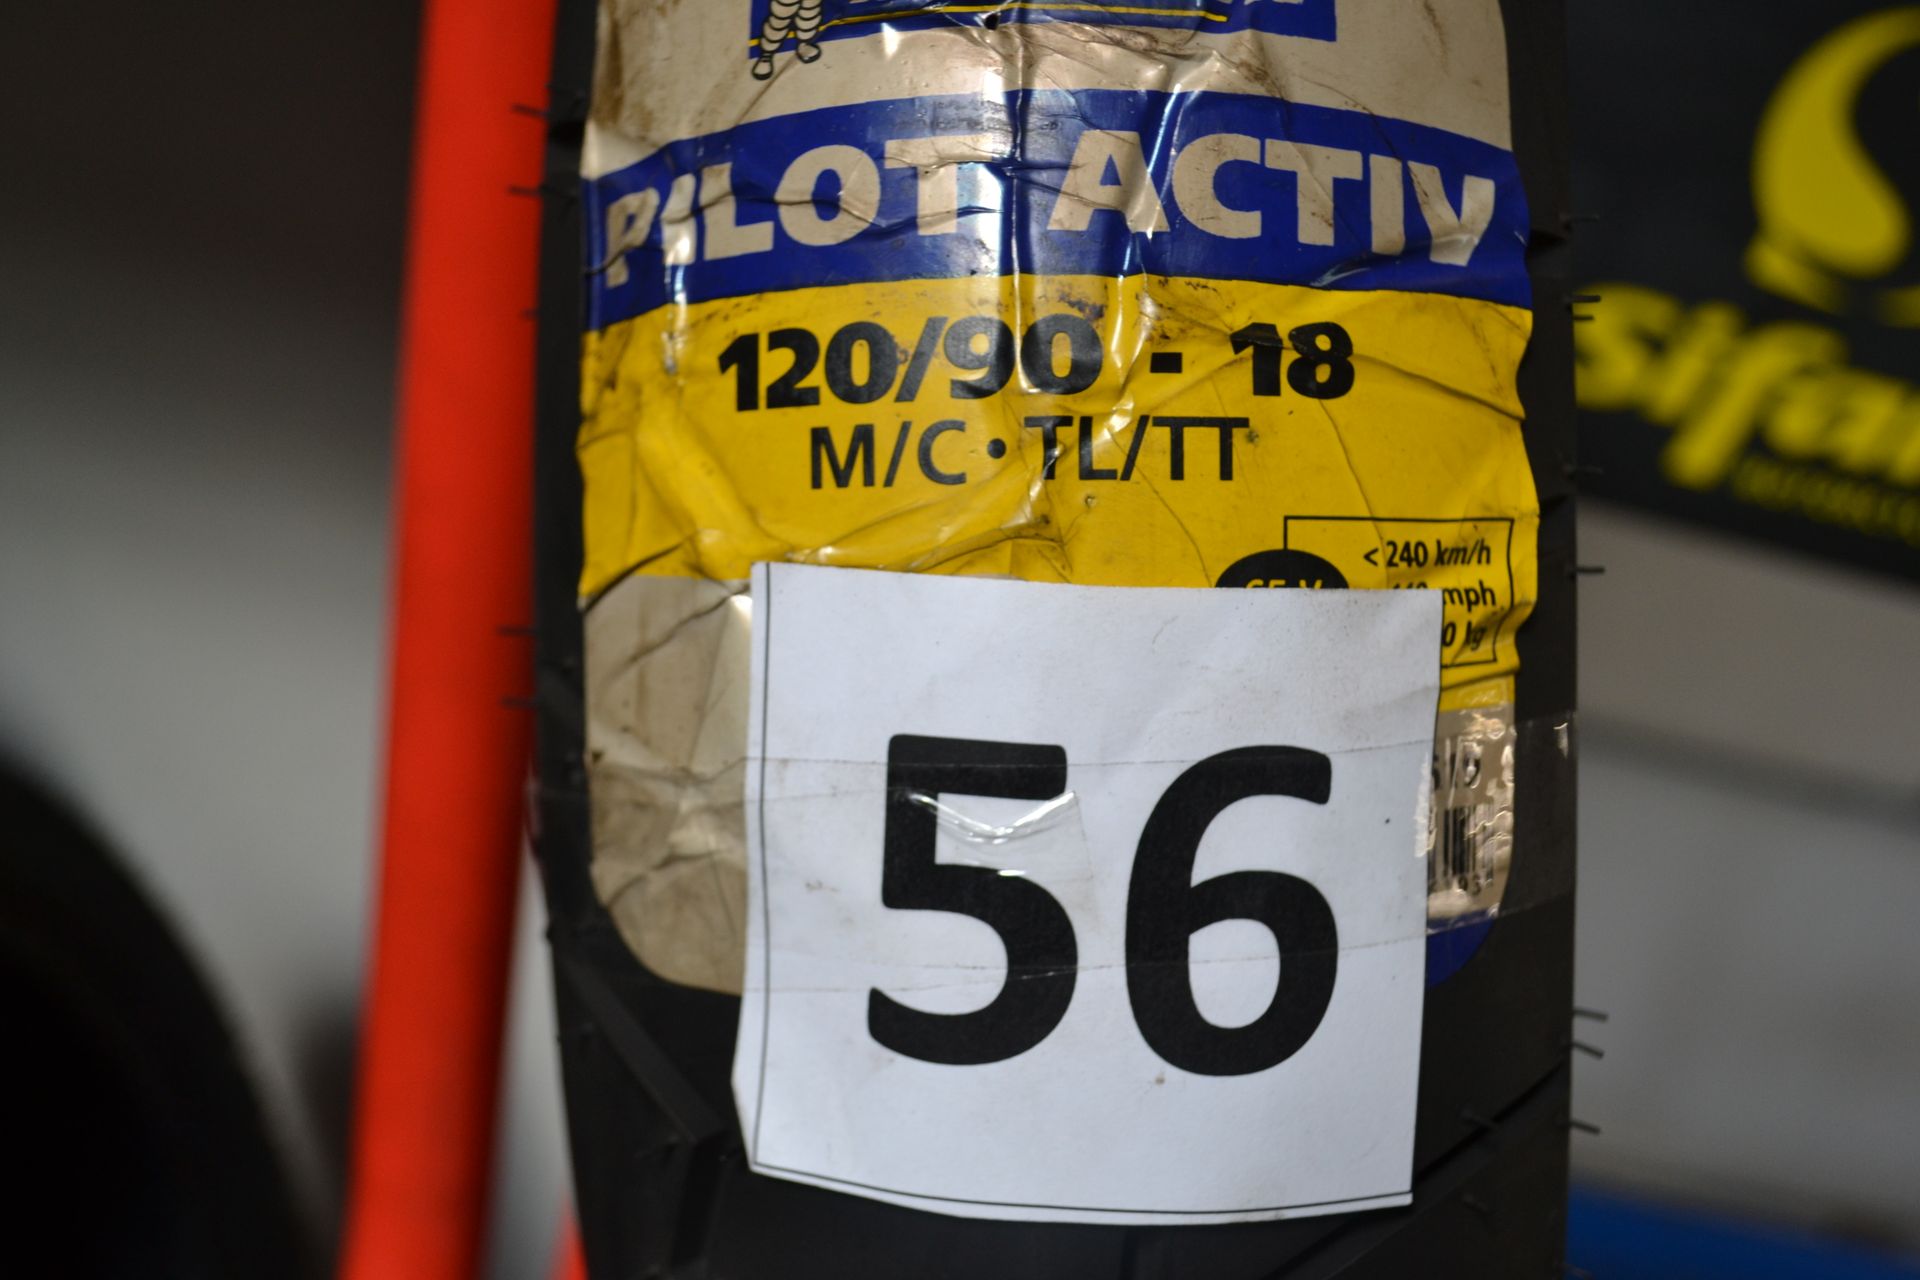 Null MICHELIN PILOT ACTIV tire, 120*90*R18, year of manufacture 2014